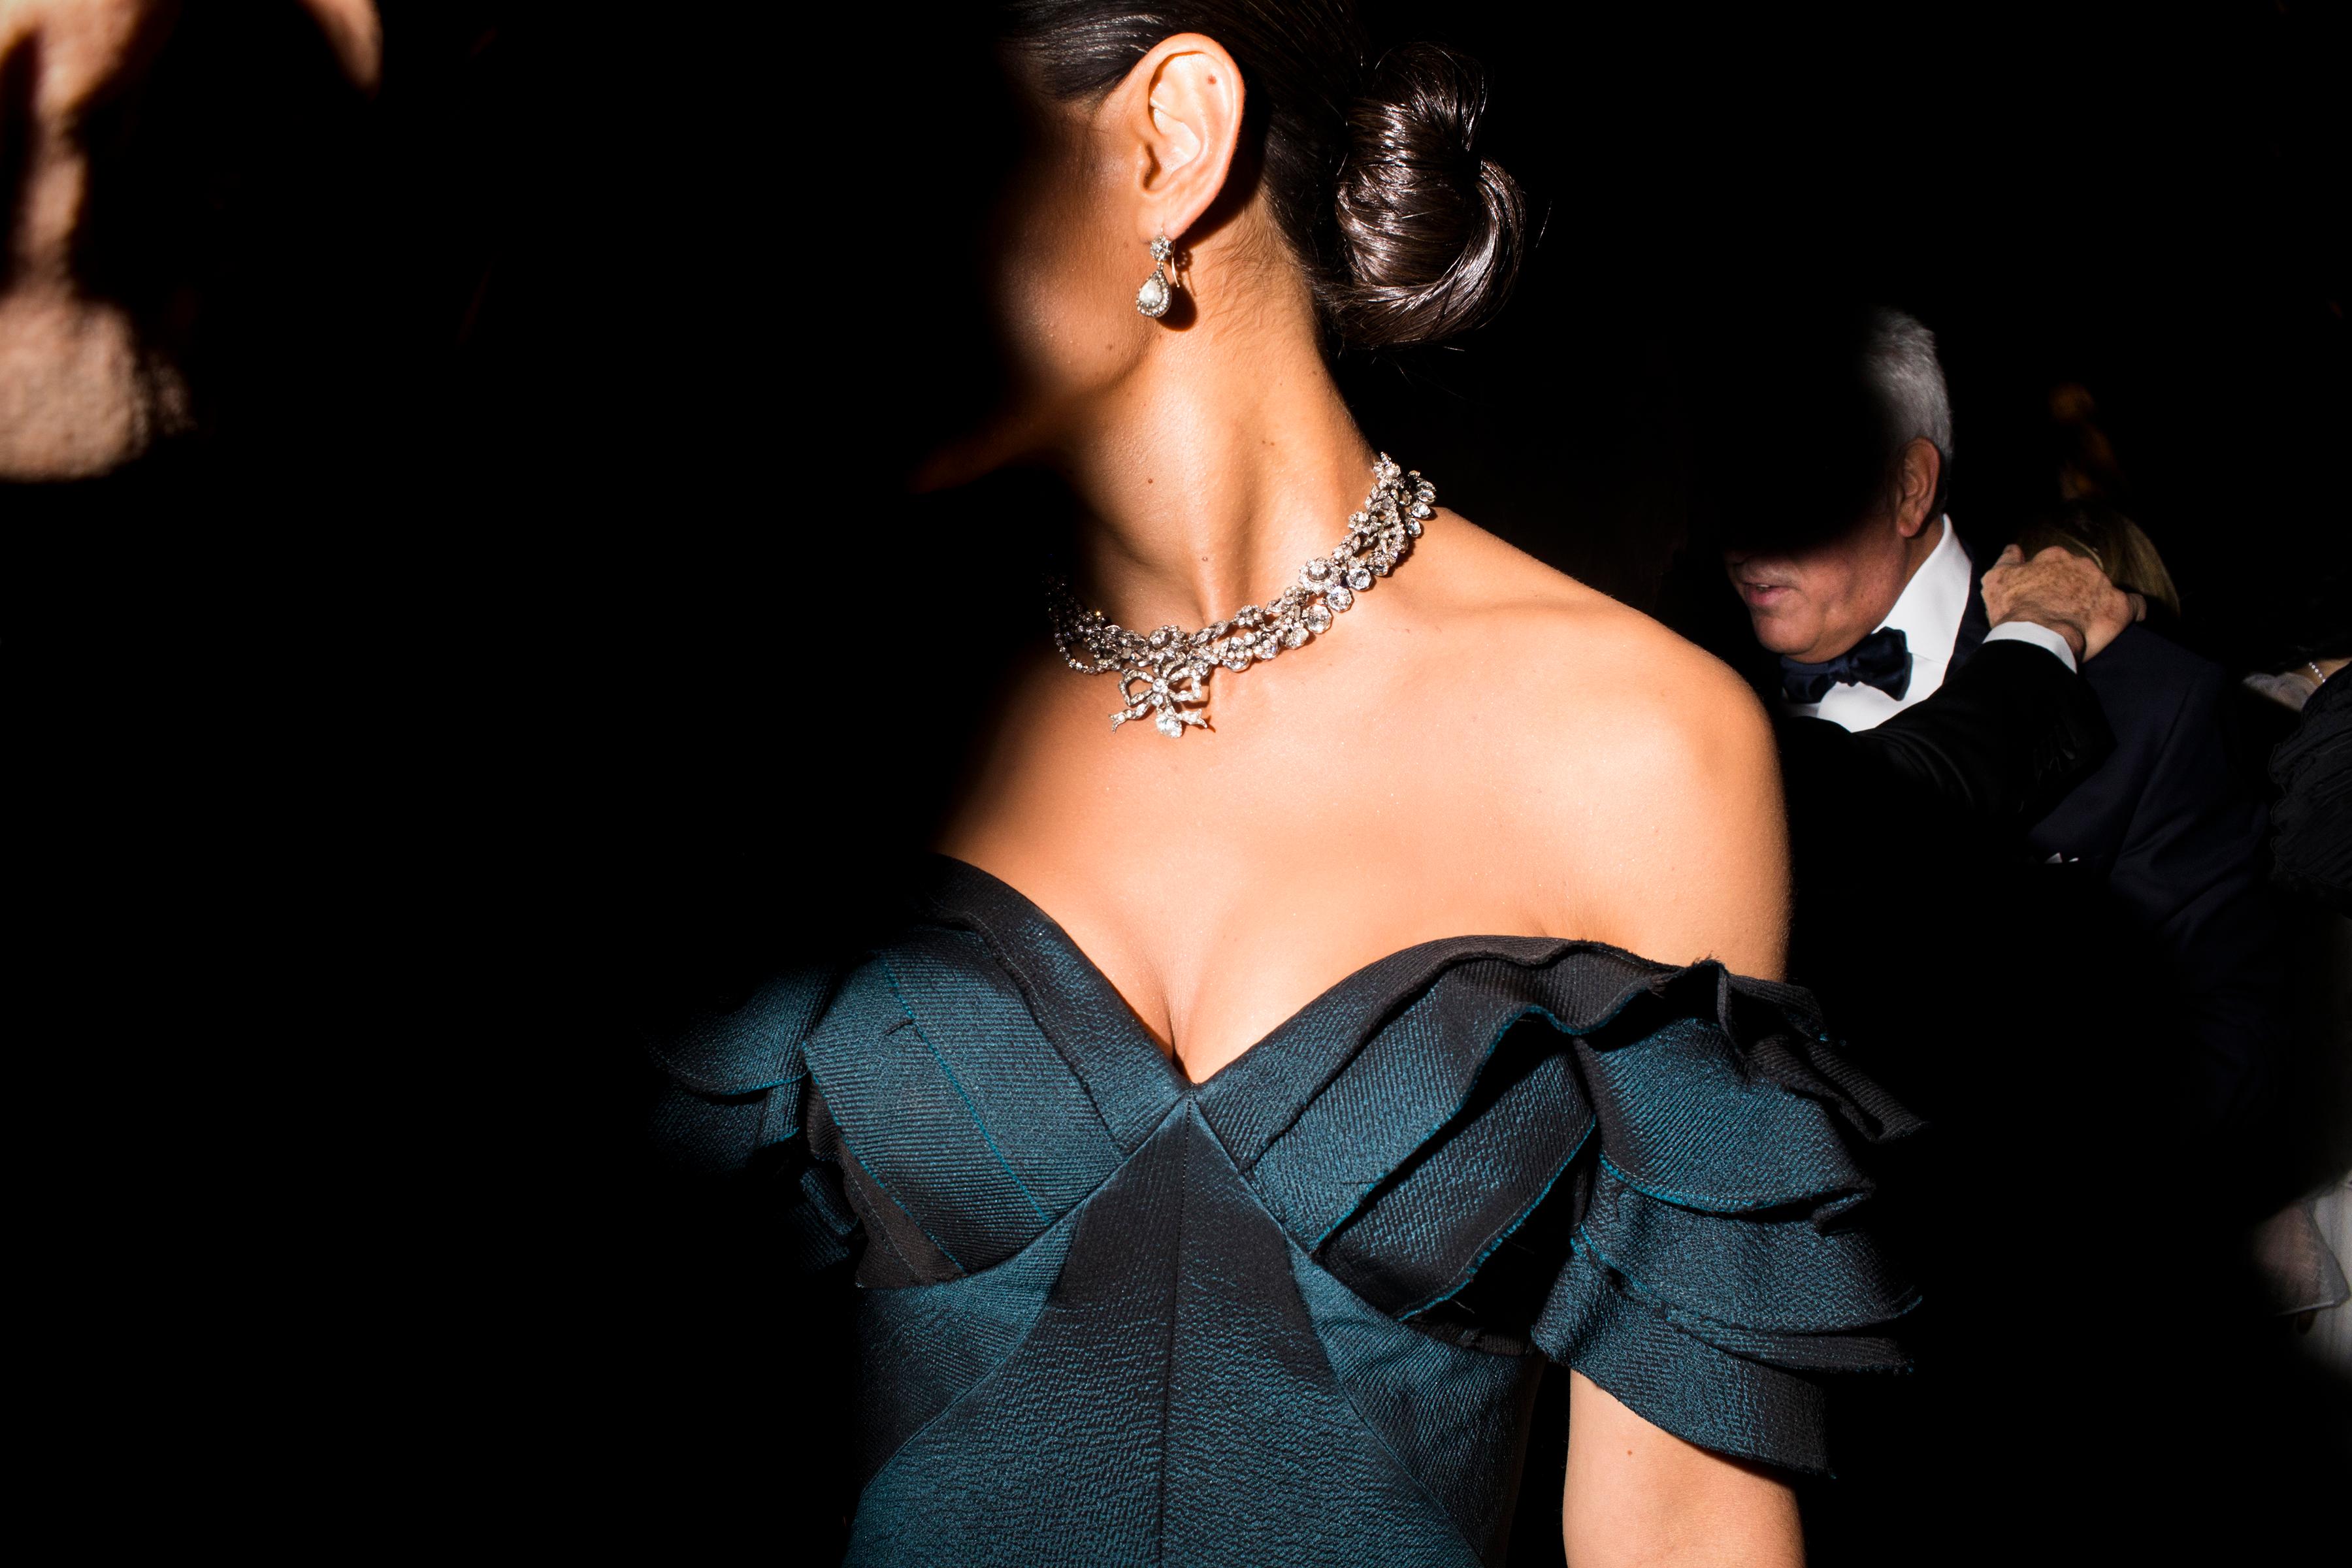 Landon Nordeman Figurative Photograph - "The Necklace (Katie Holmes at the Met Gala)" - Abstract Fashion Photography 